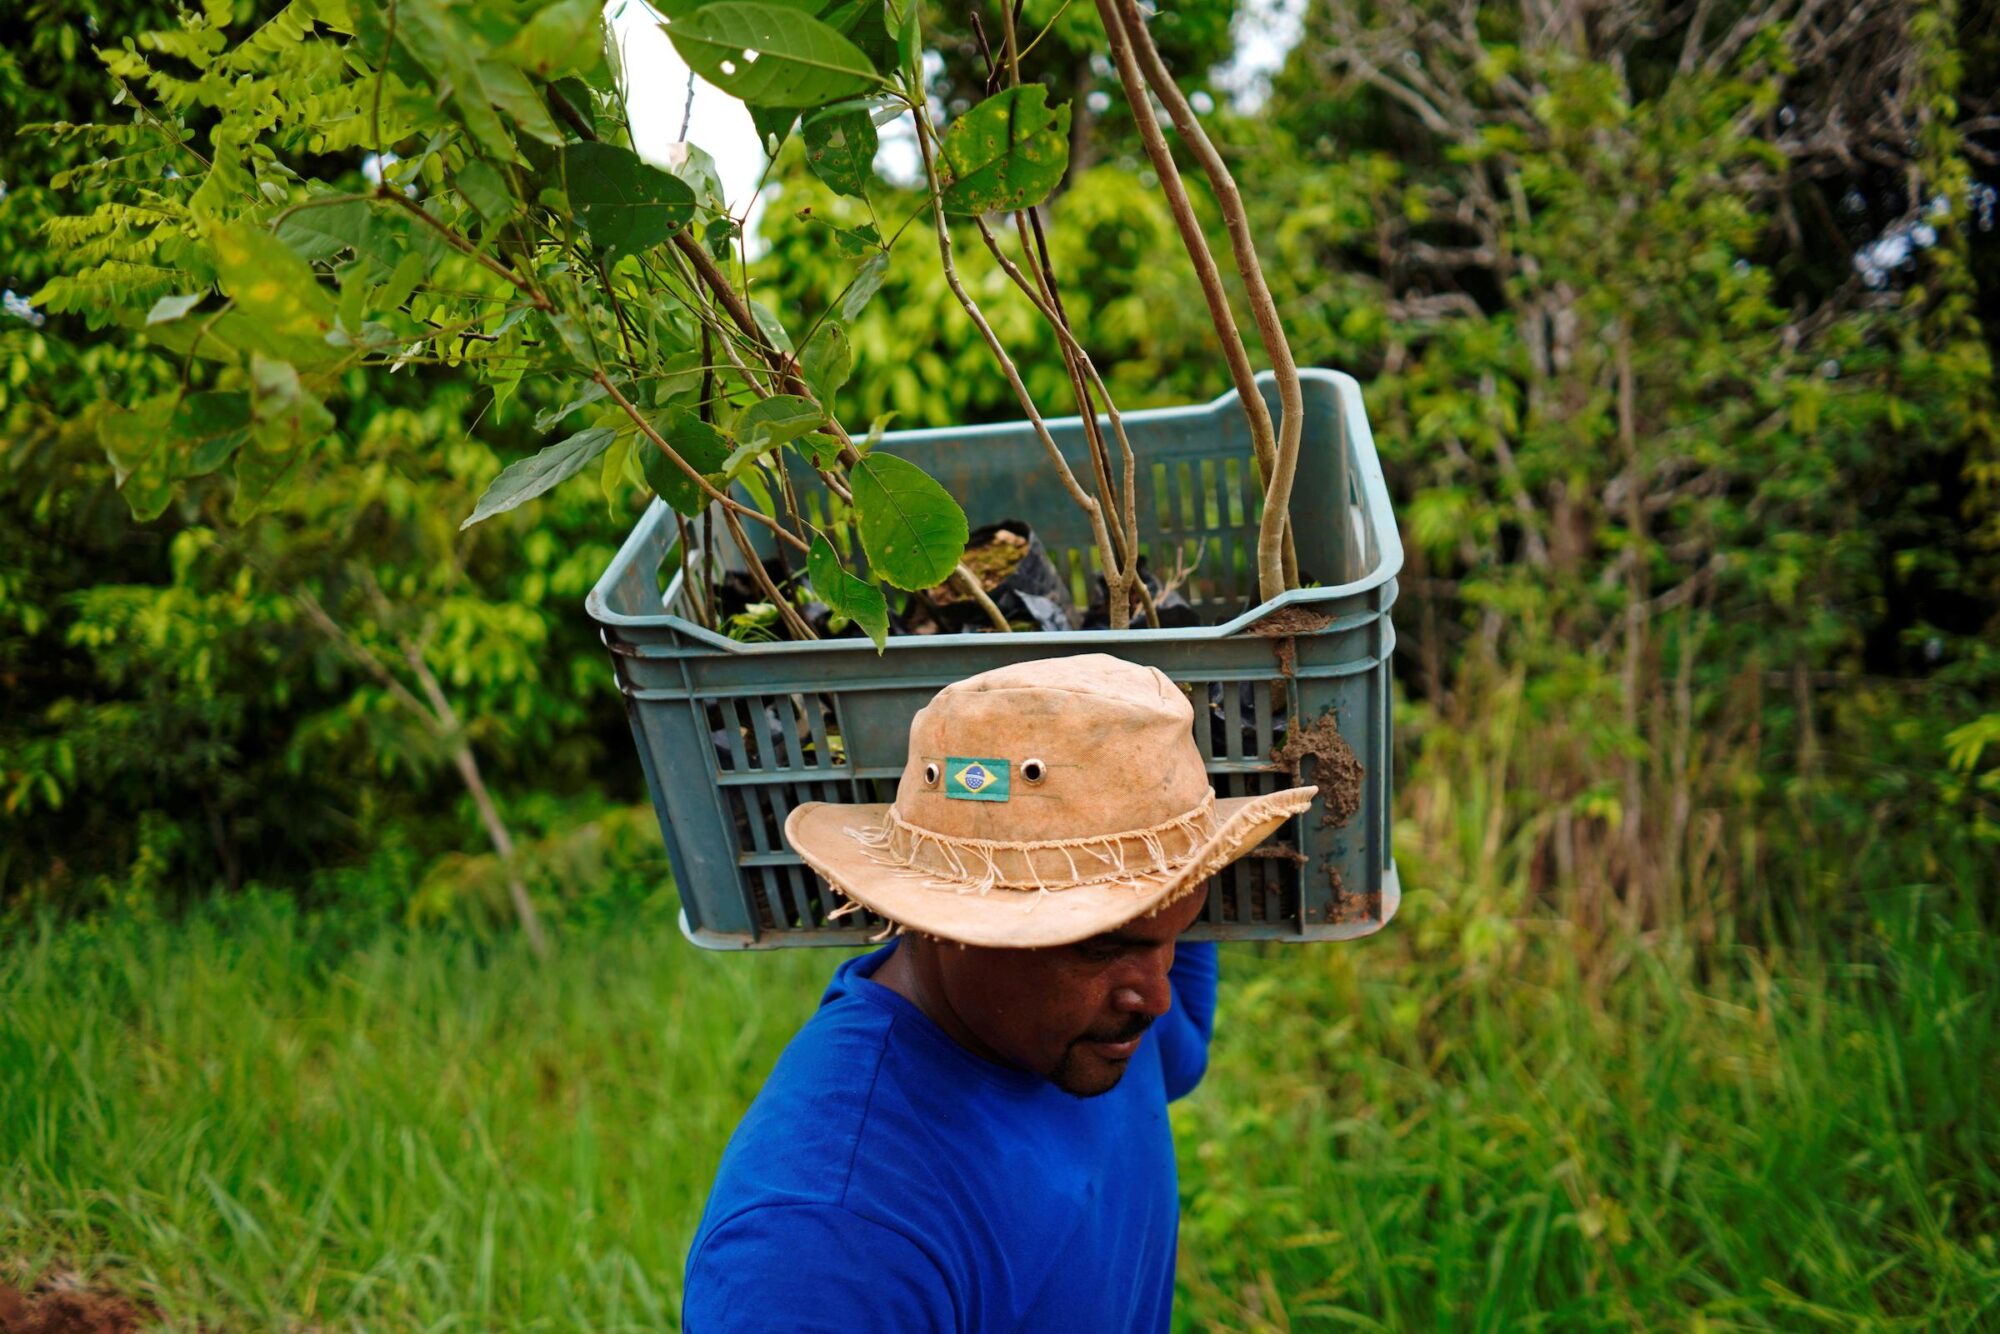 <p>A worker carries trees to be planted during a reforestation project in Nova Mutum, Brazil, 2020. Latin America is one of the regions most vulnerable to climate change, but adaptation and mitigation projects are increasing in the region (Image: Alexandre Meneghini / Alamy)</p>